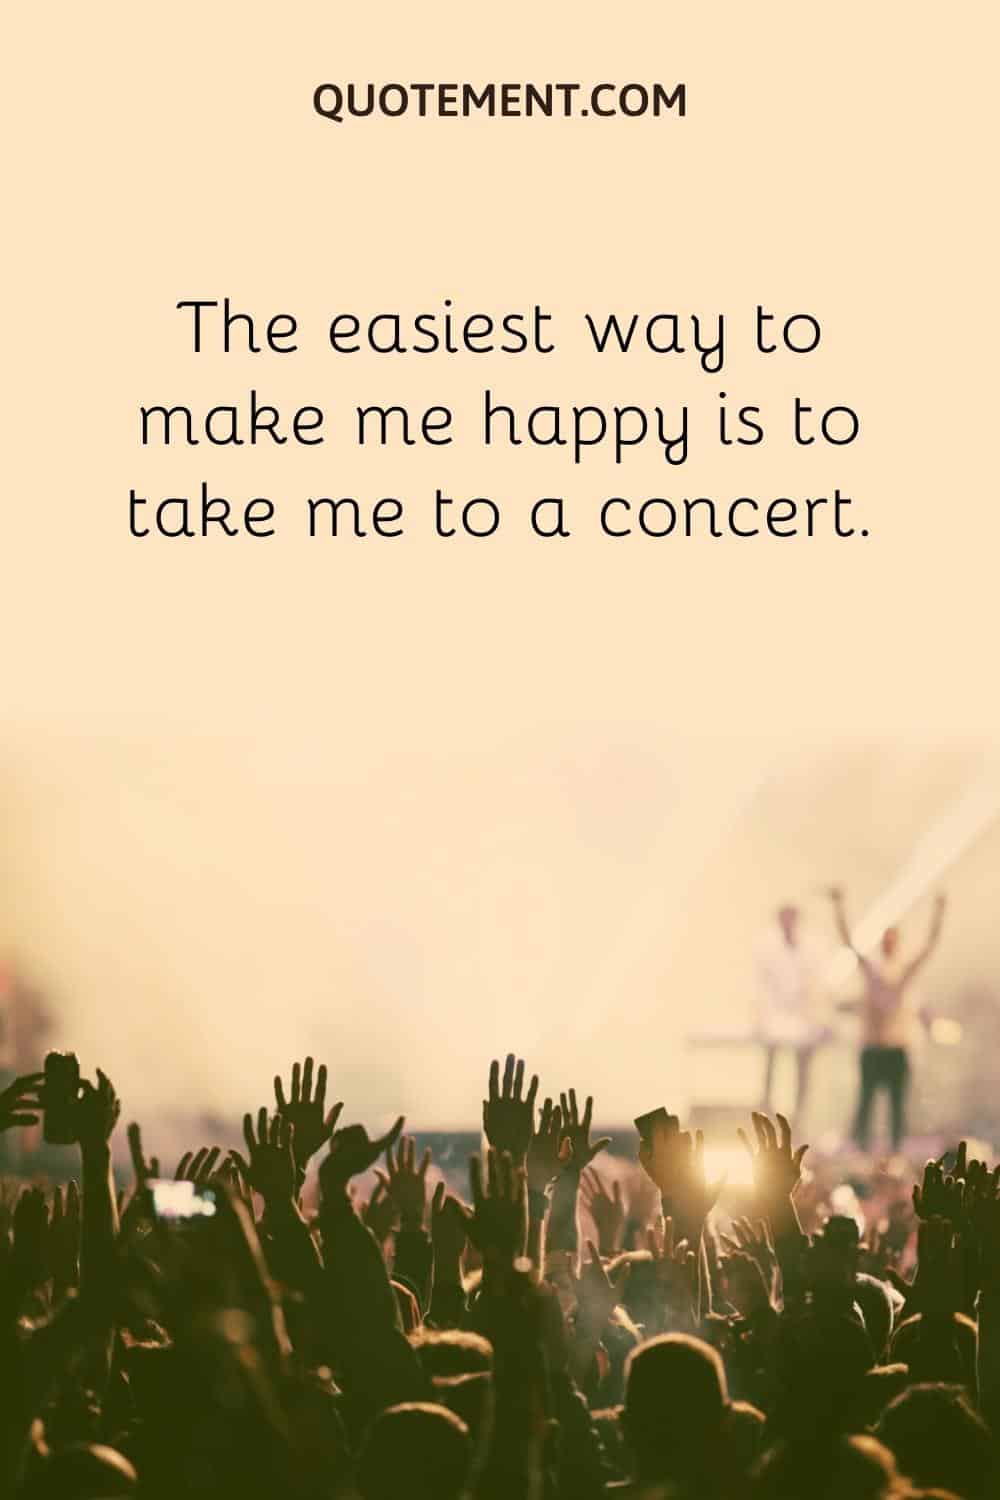 The easiest way to make me happy is to take me to a concert.